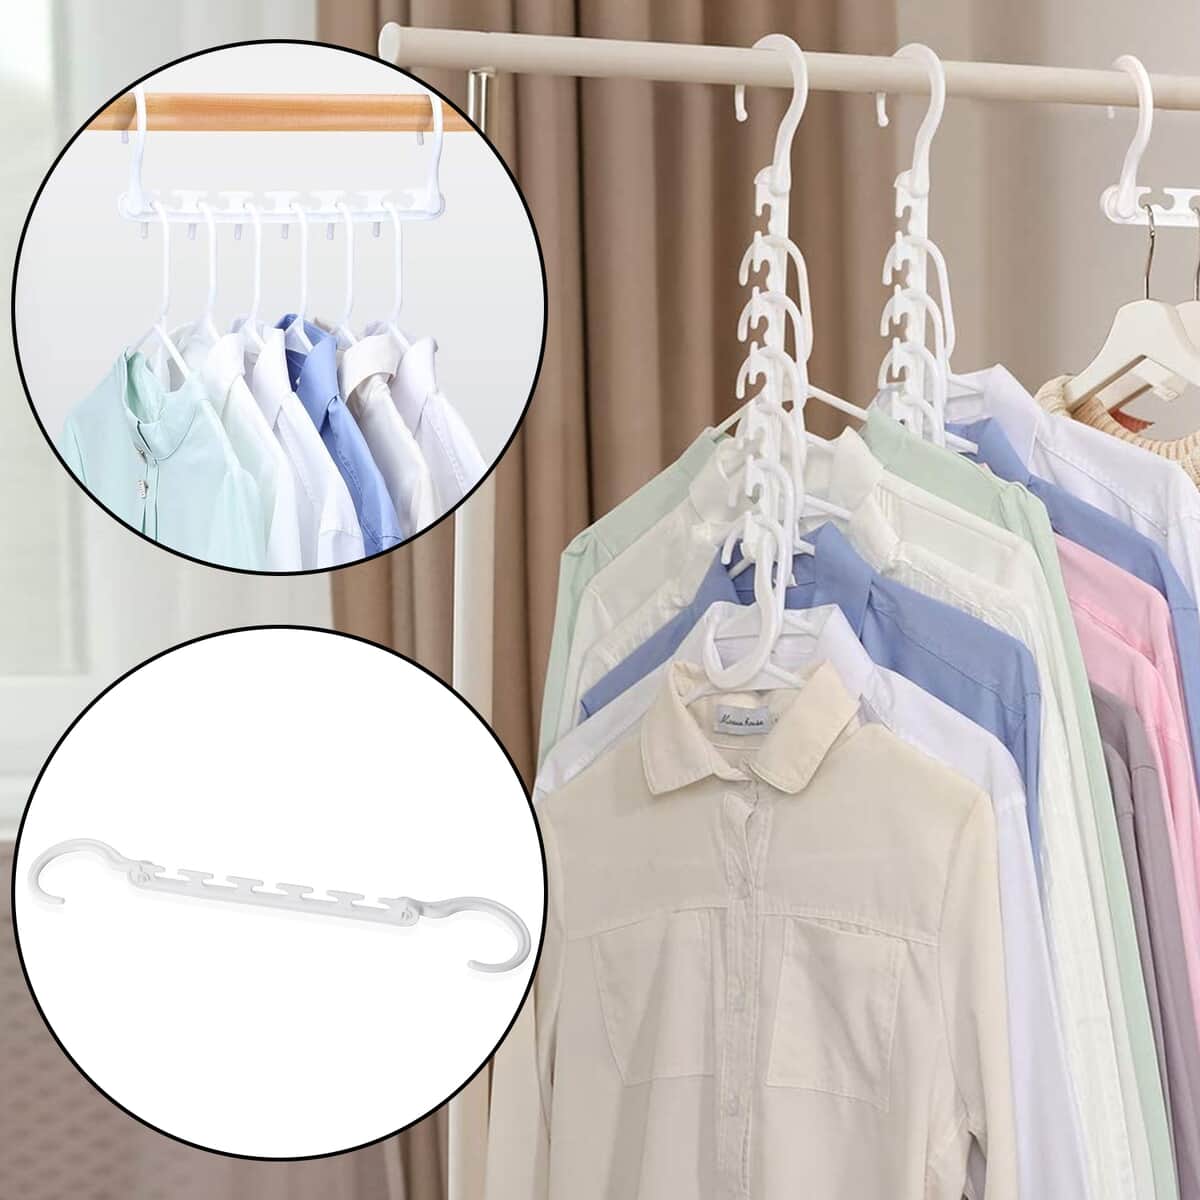 Set of 8 Space Saving Hangers -White (Holds up to 30 lbs) image number 1